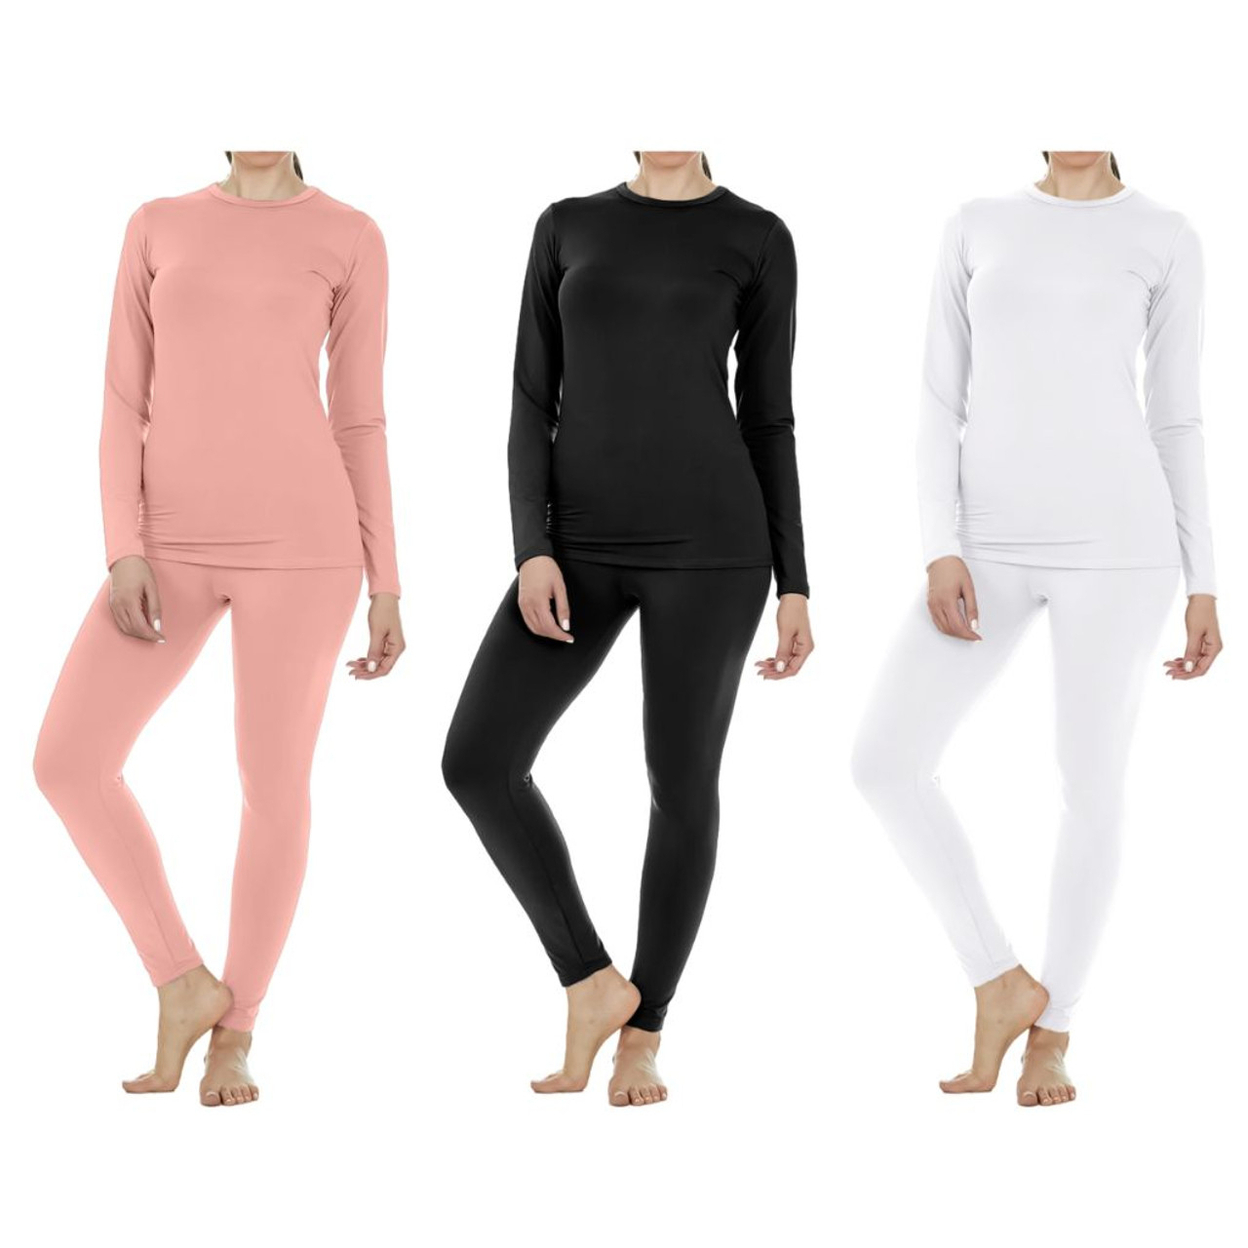 3-Sets: Women's Fleece Lined Winter Warm Soft Thermal Sets For Cold Weather - Small